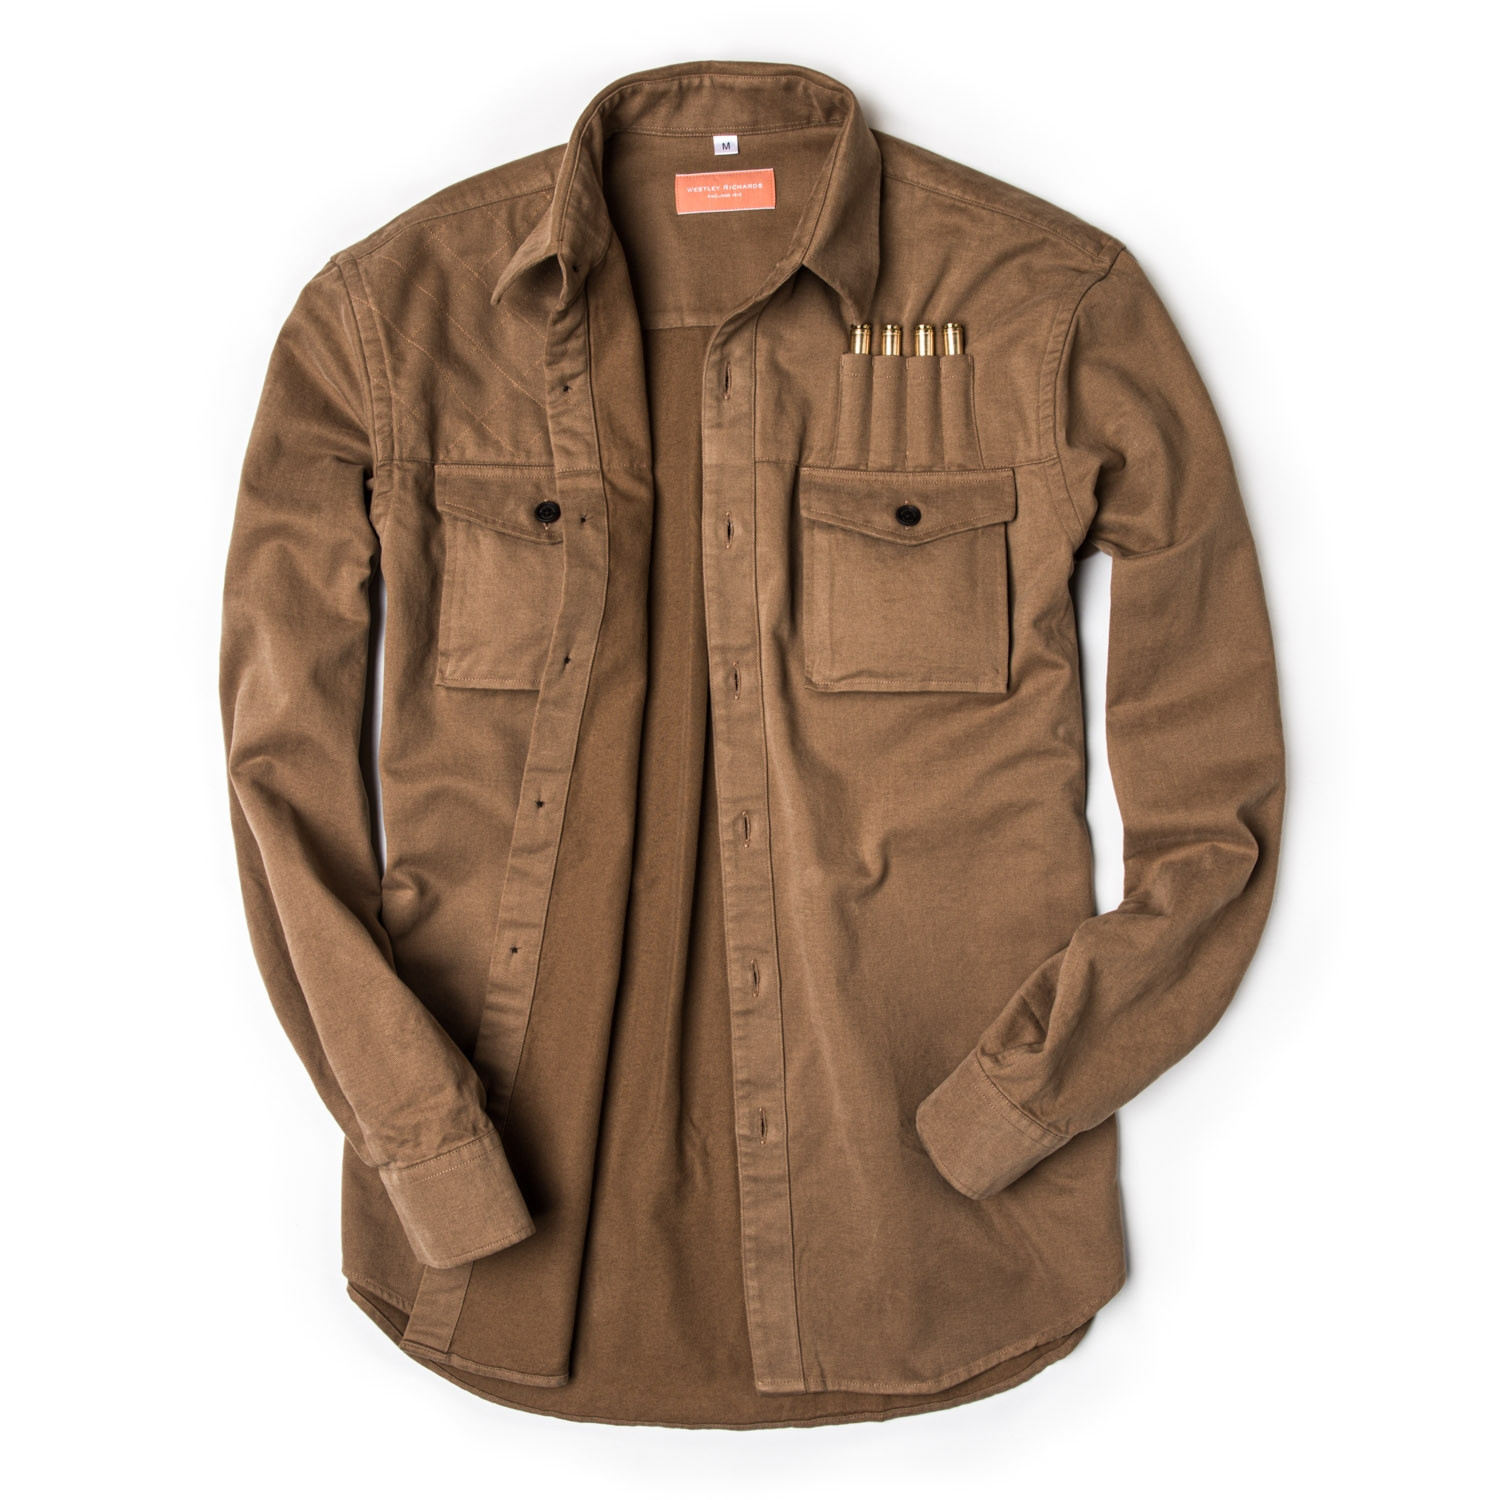 Westley Richards Expedition Safari Shirt in Brushed Fawn